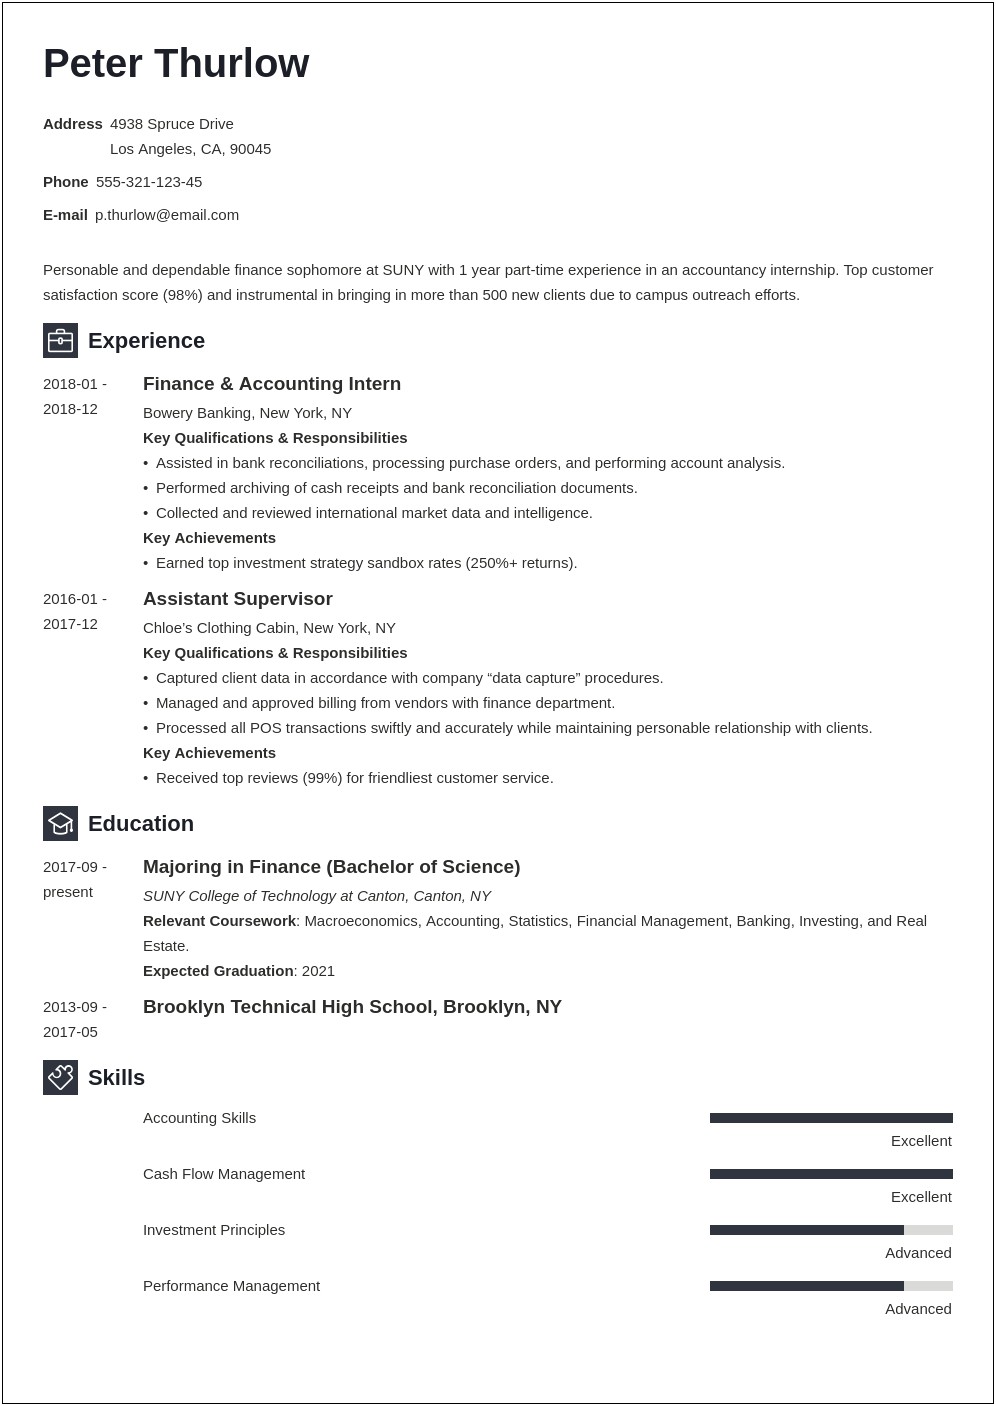 Fresh Graduate Resume With Ojt Experience